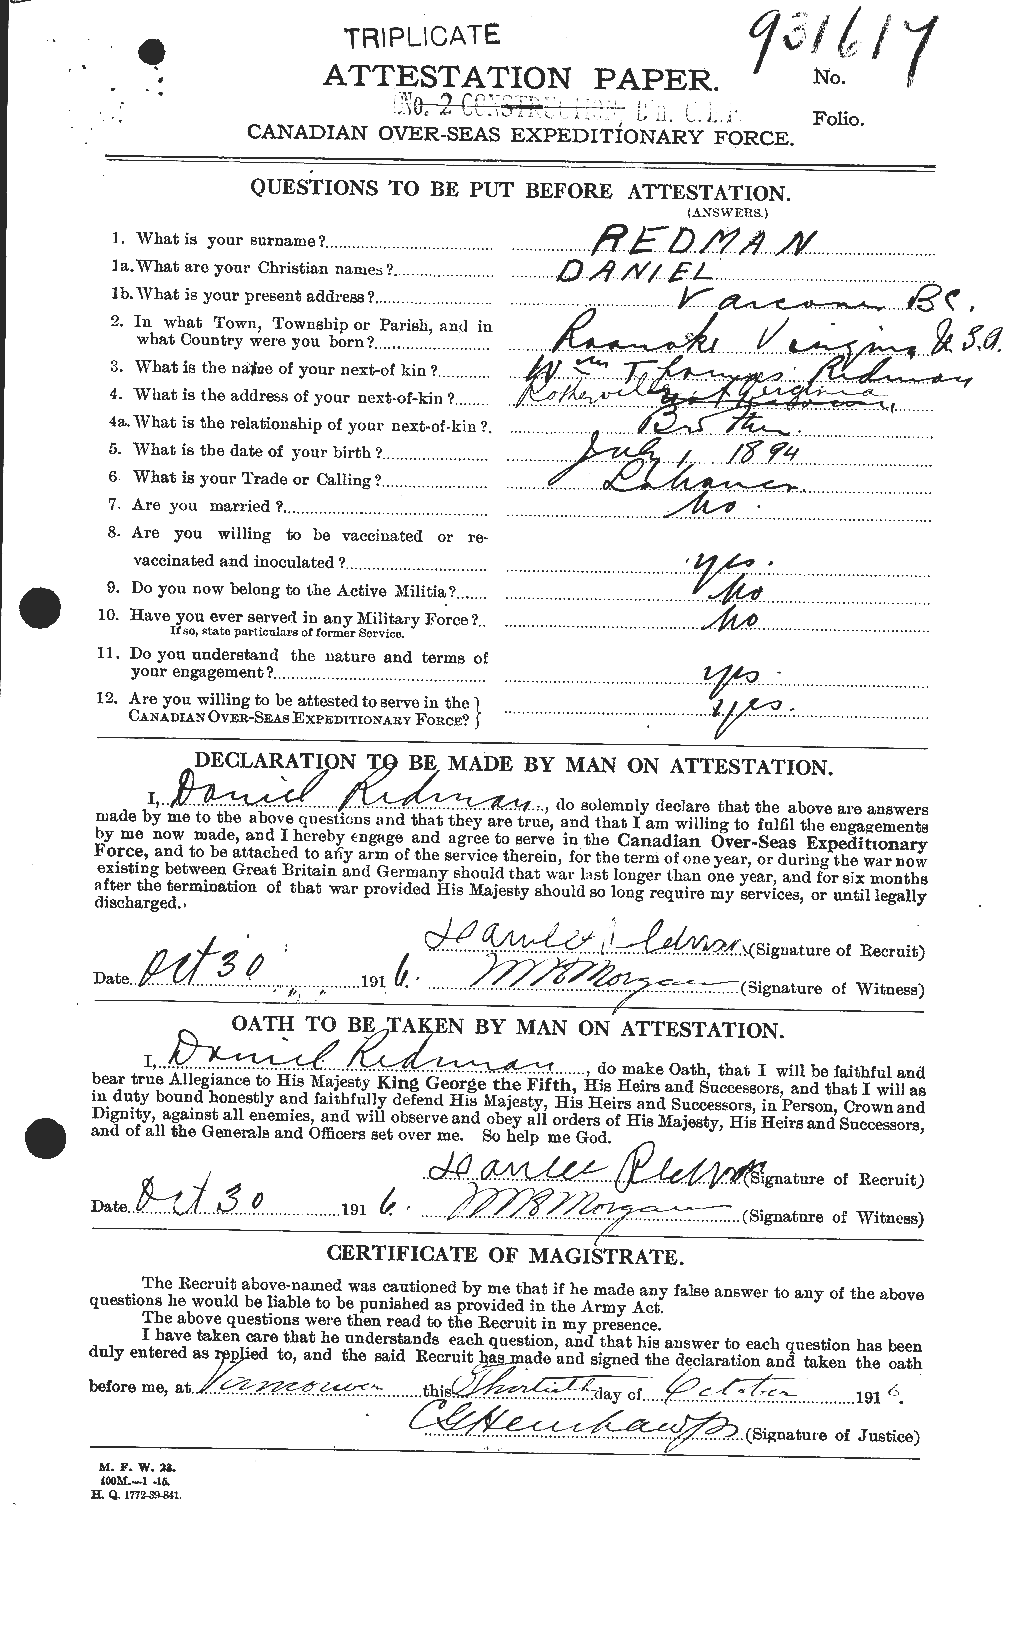 Personnel Records of the First World War - CEF 596026a